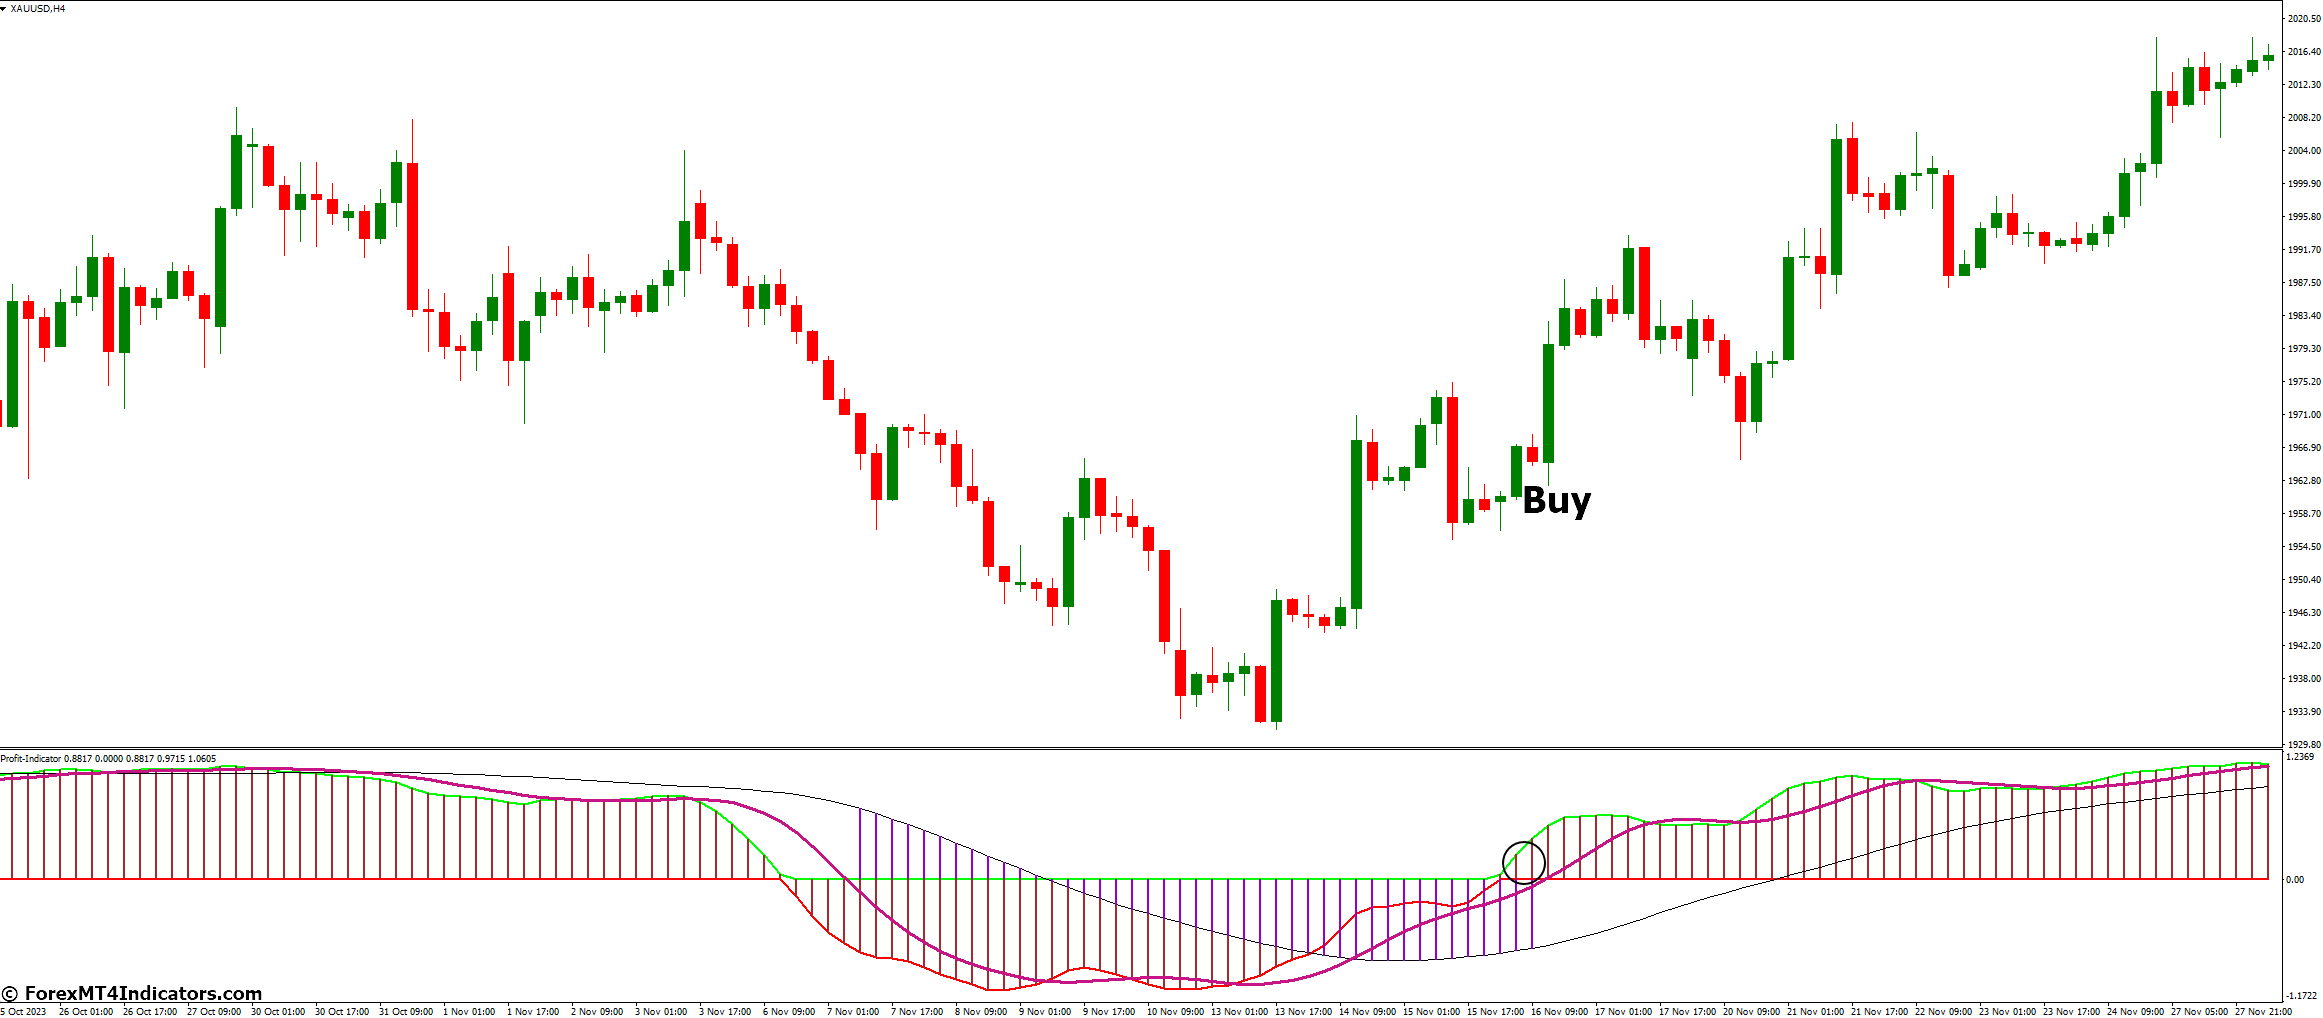 How to Trade with Profit MT4 Indicator - Buy Entry